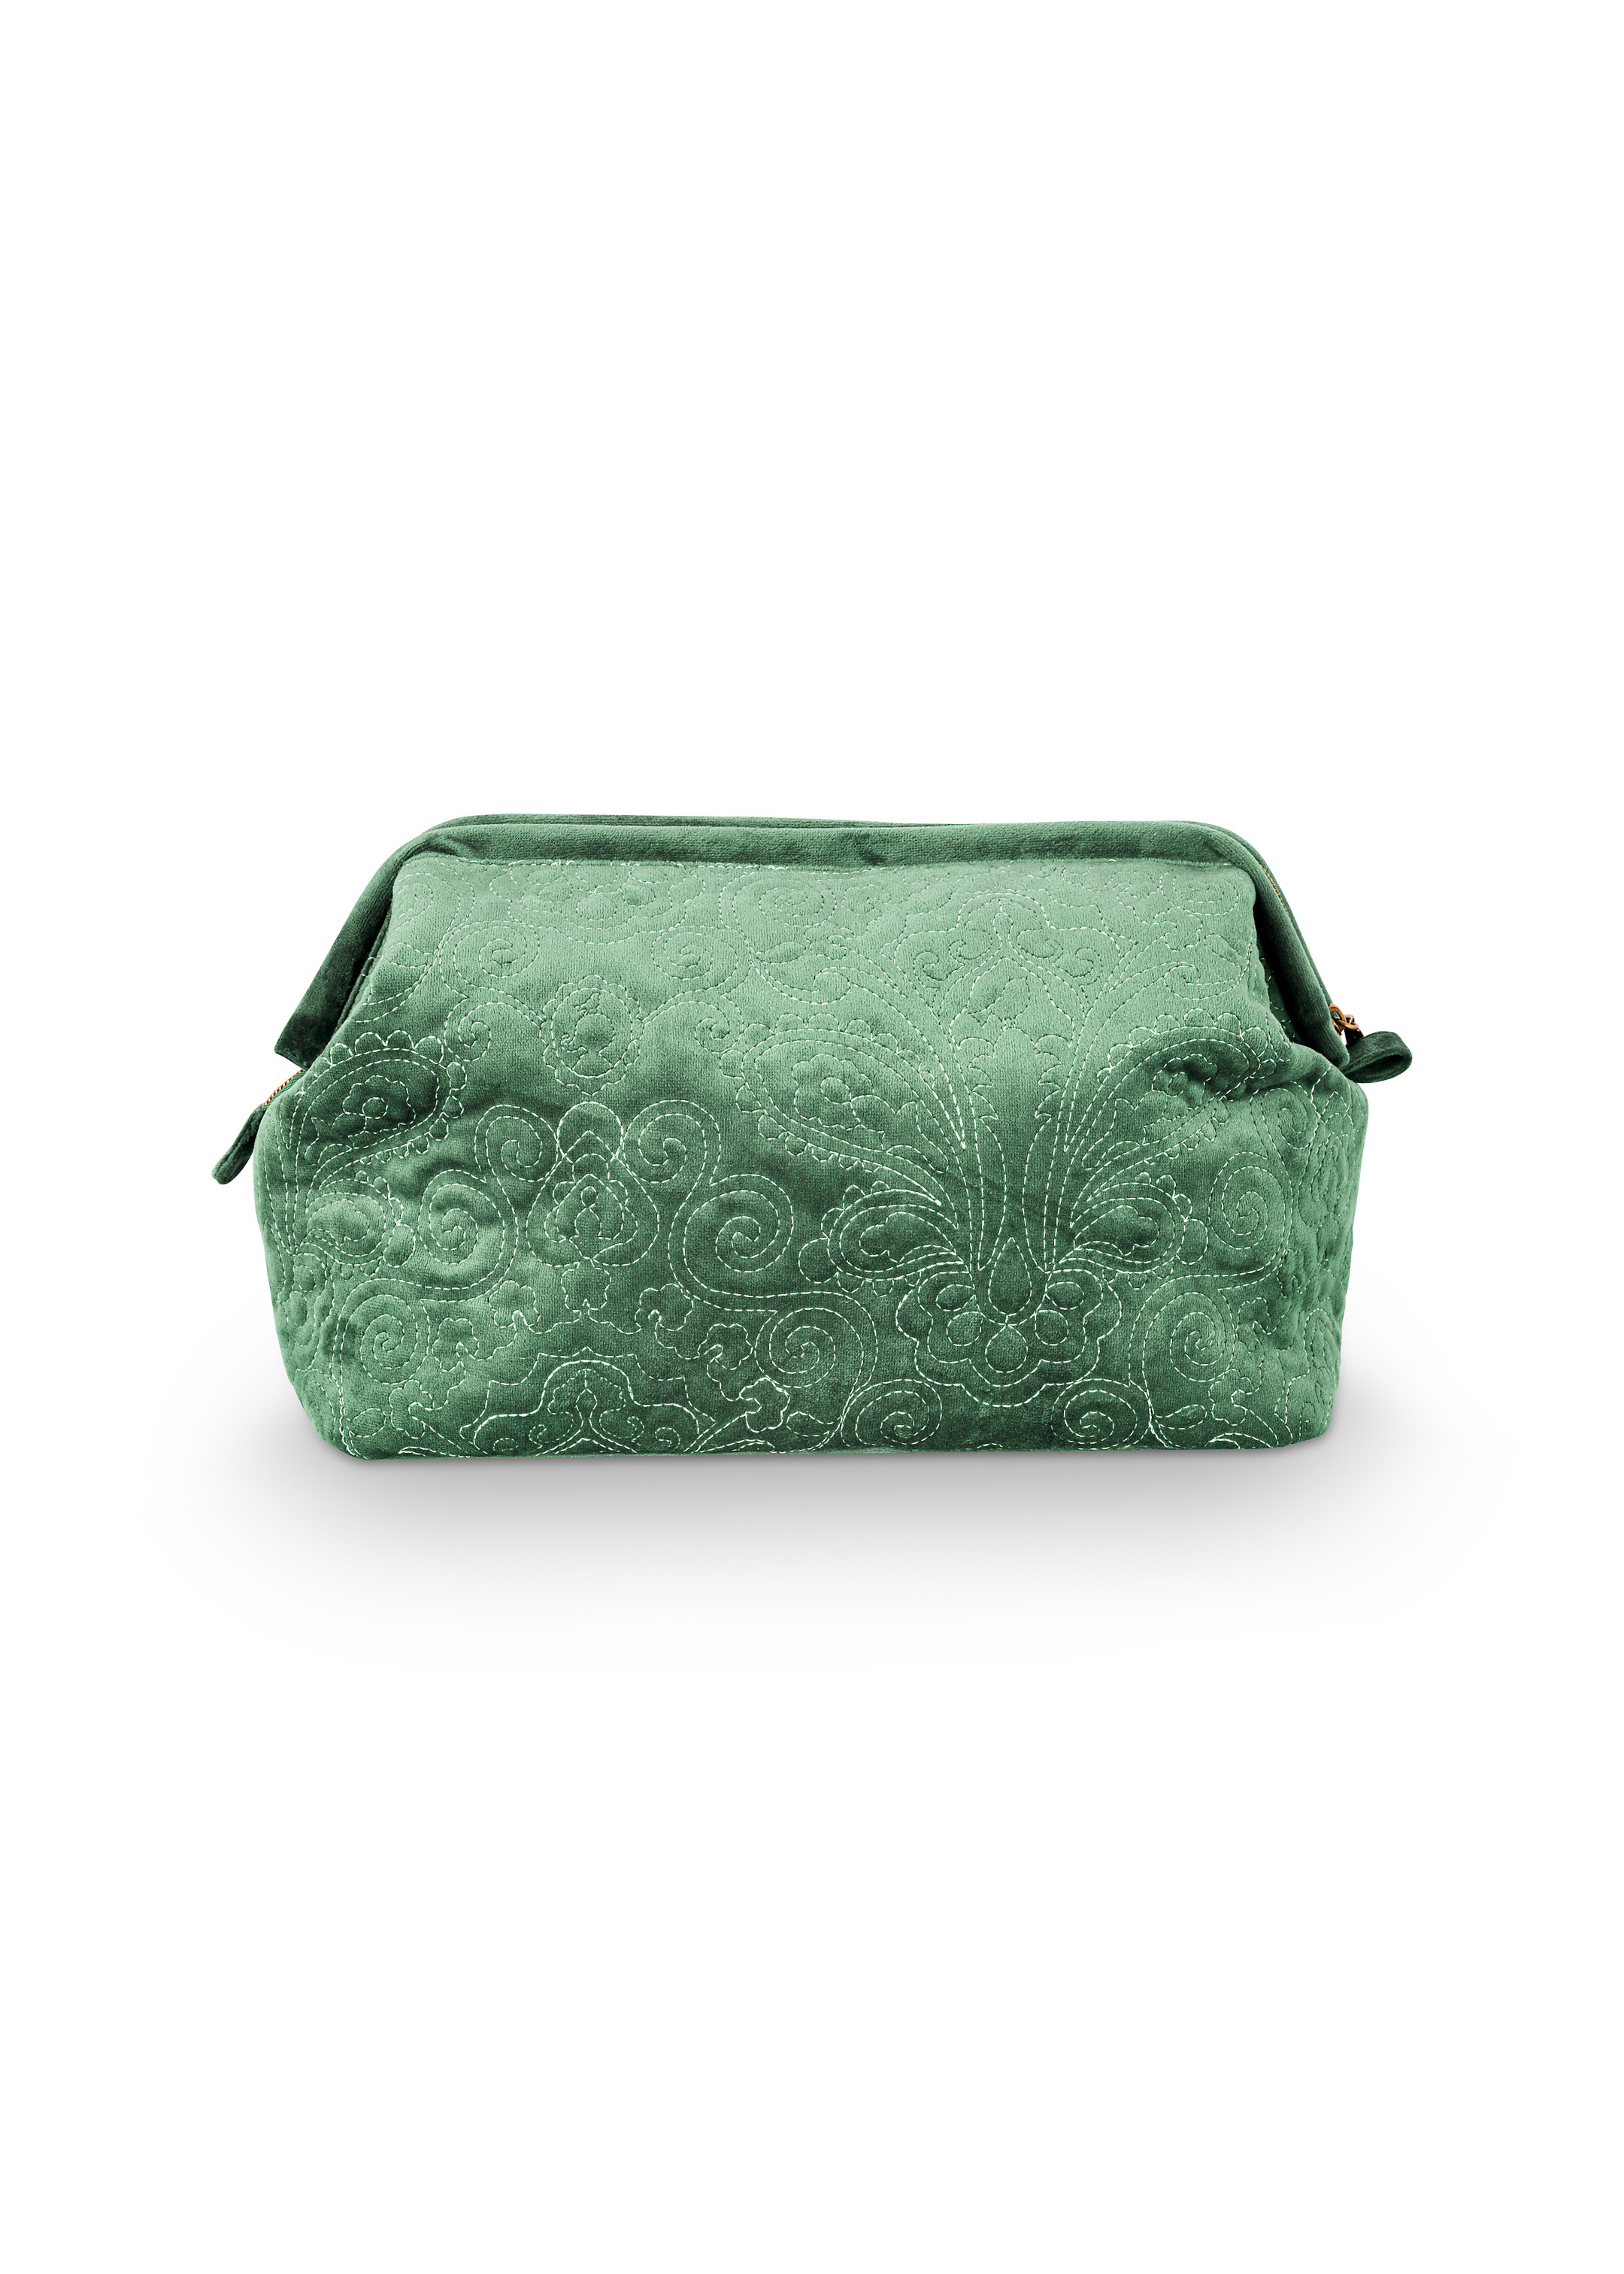 Cosmetic Purse Ex Lg Velvet Quilted Green 30x20.7x13.8cm Gift